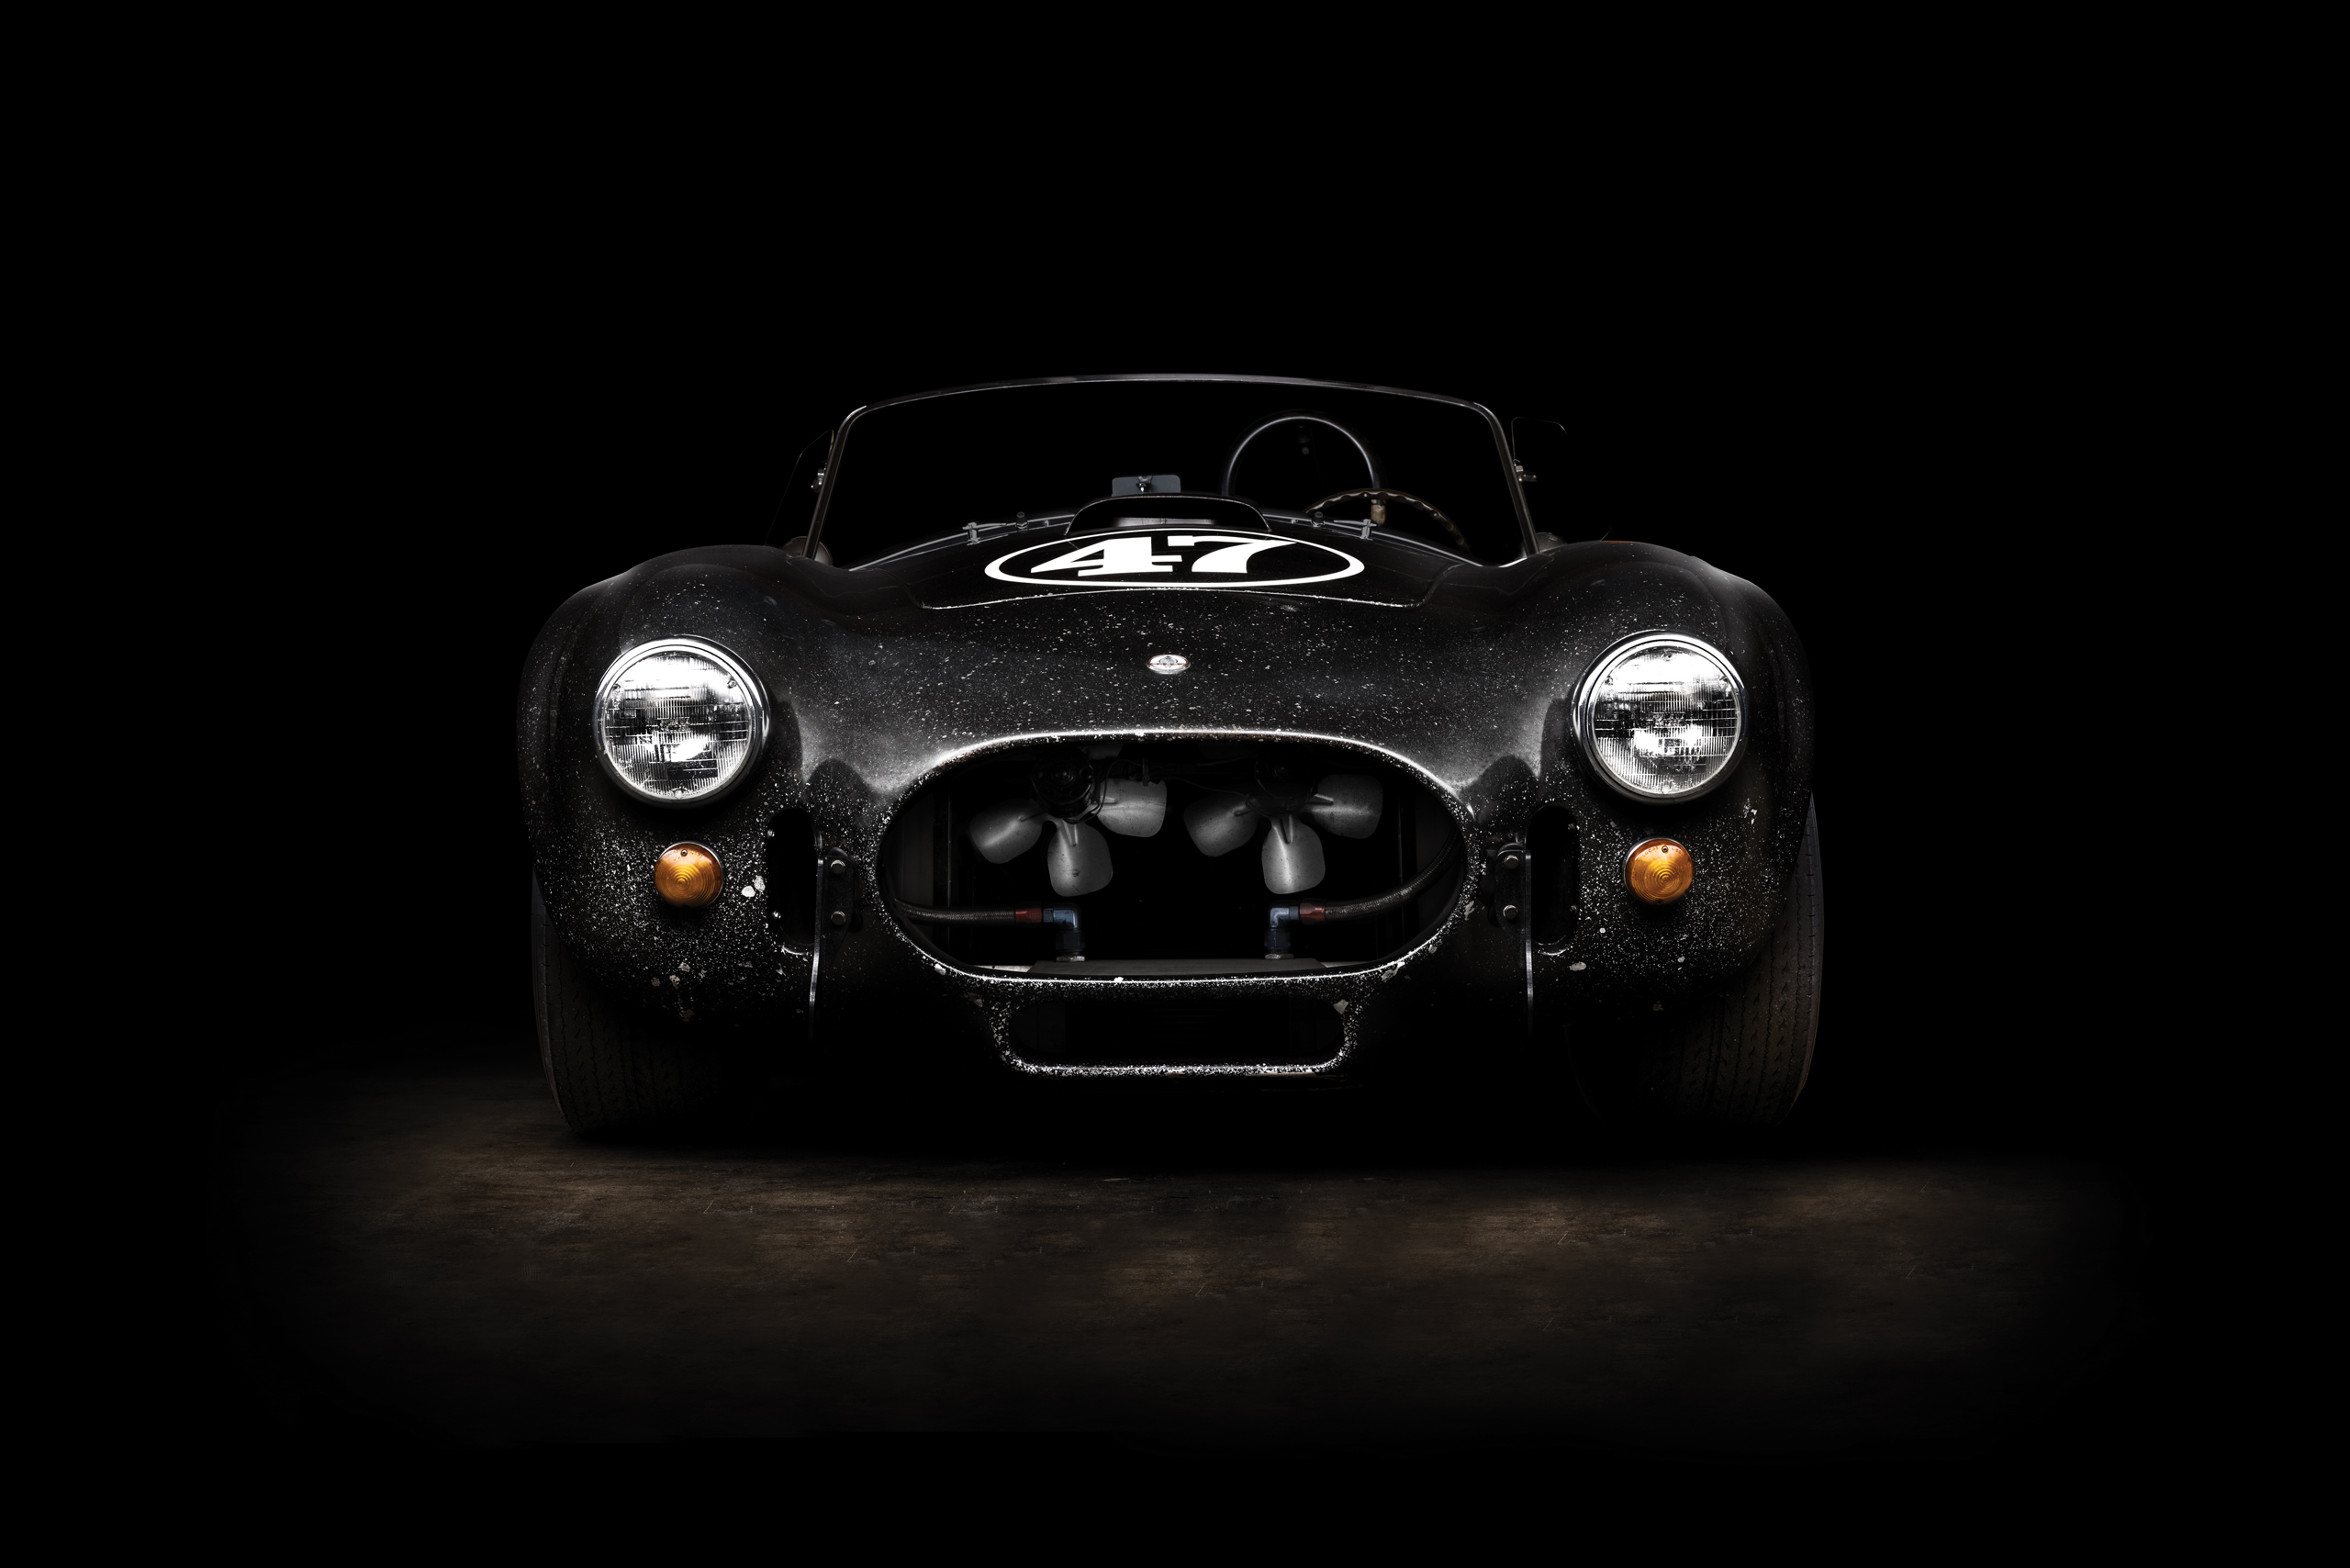 Sweeping Le Mans in '66? Just one of Shelby American's miracles